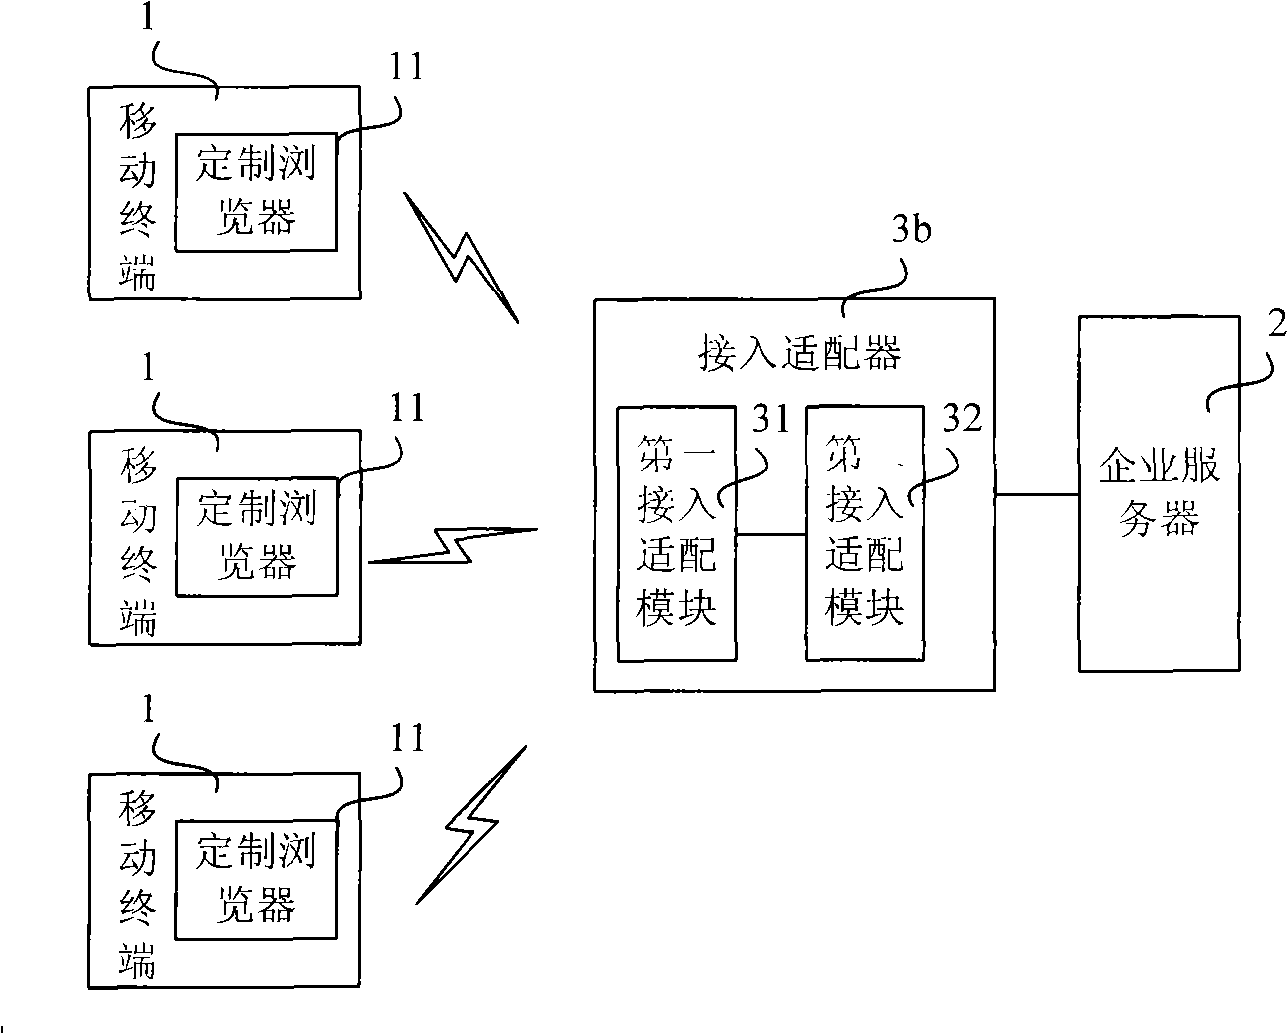 Mobile office system and method